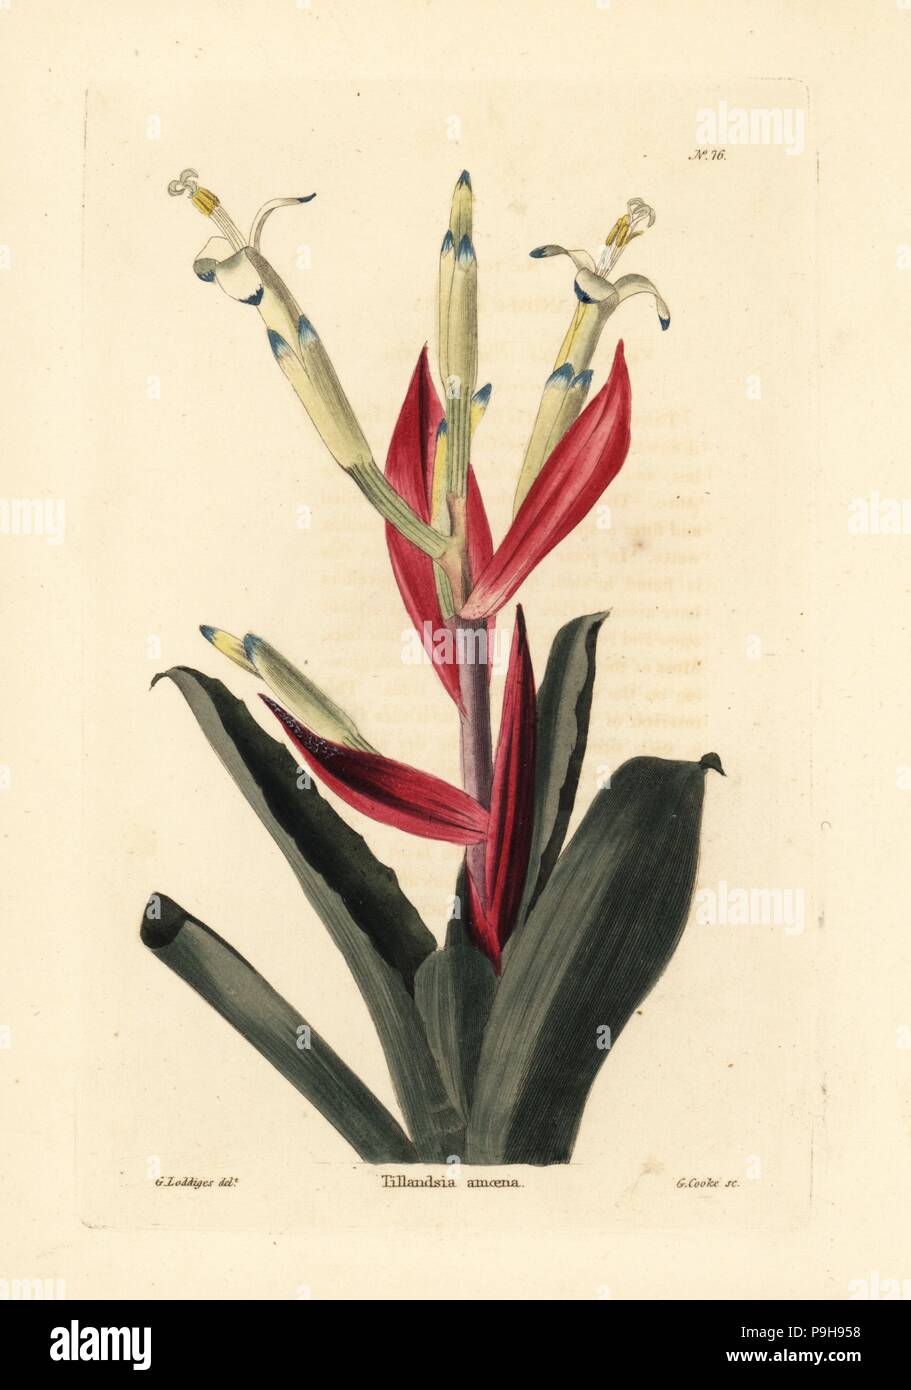 Billbergia amoena (Tillandsia amoena). Handcoloured copperplate engraving by George Cooke after George Loddiges from Conrad Loddiges' Botanical Cabinet, Hackney, 1817. Stock Photo